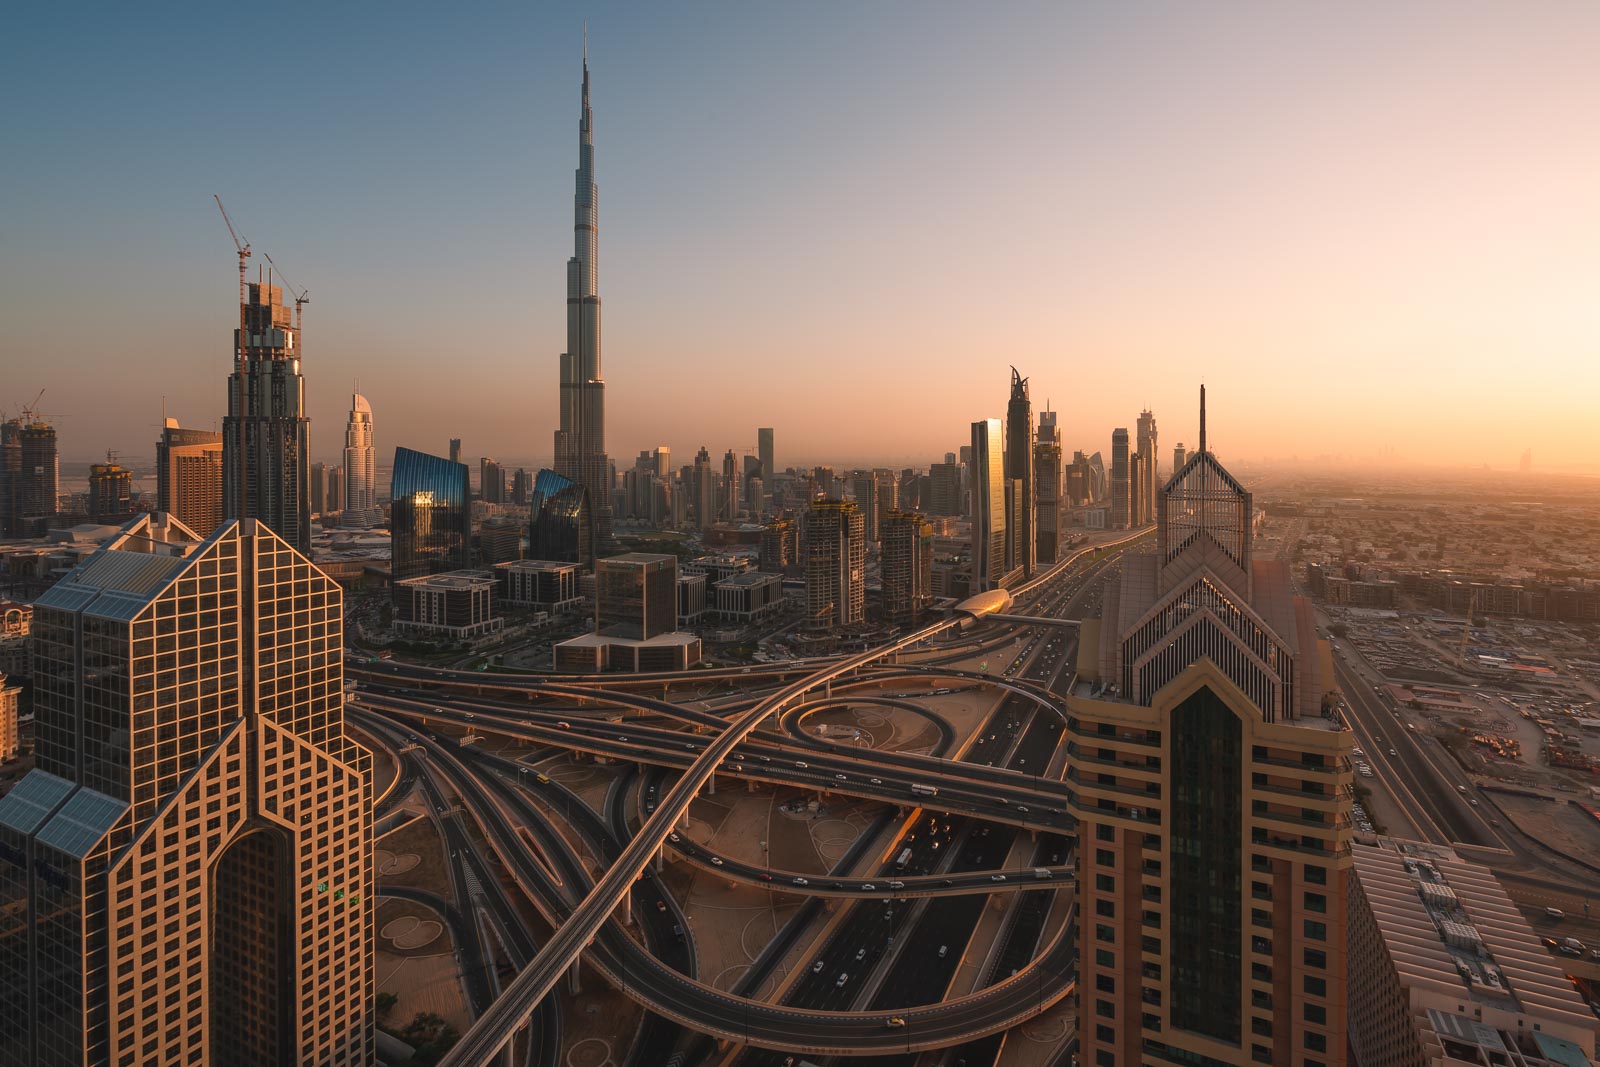 19 Interesting and Fun Facts About Dubai You Need To Know